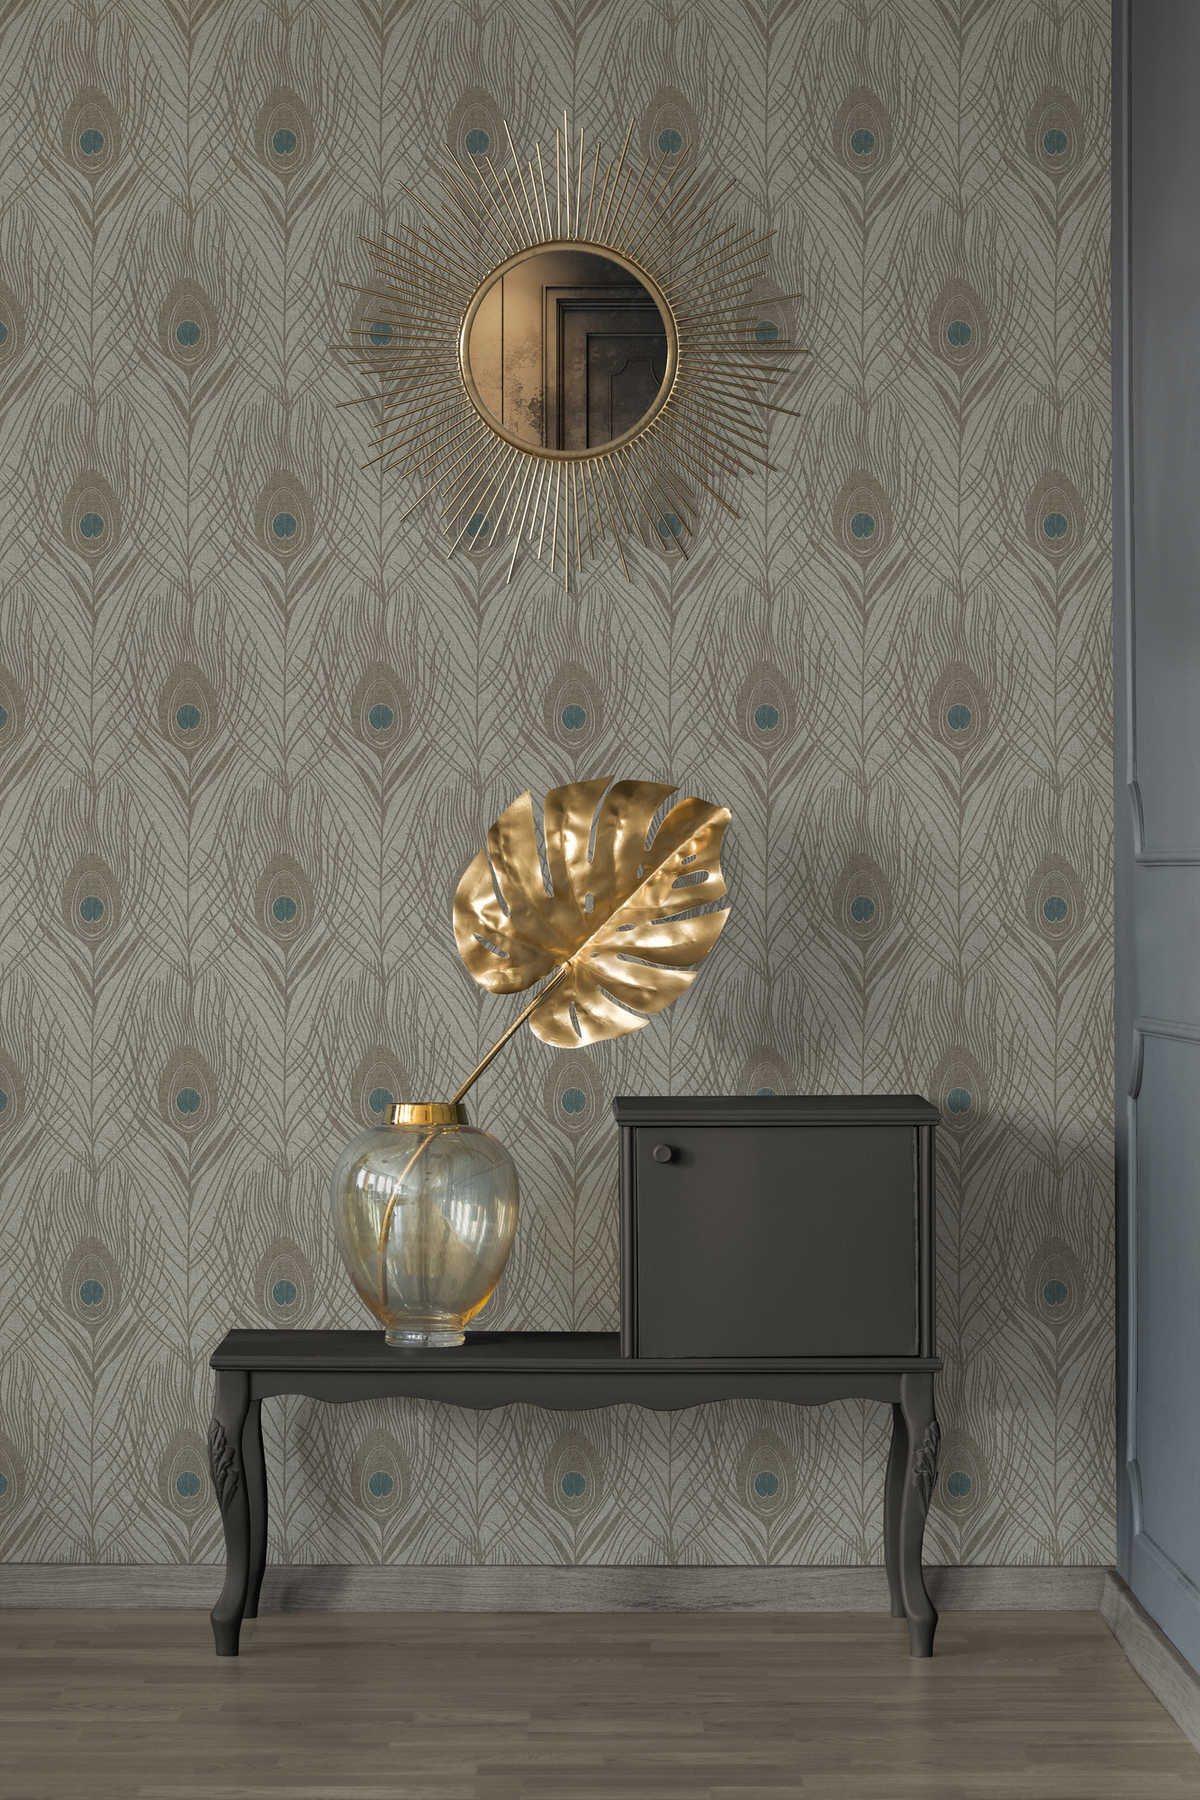             Brown non-woven wallpaper with peacock feathers, detailed - brown, grey, blue
        